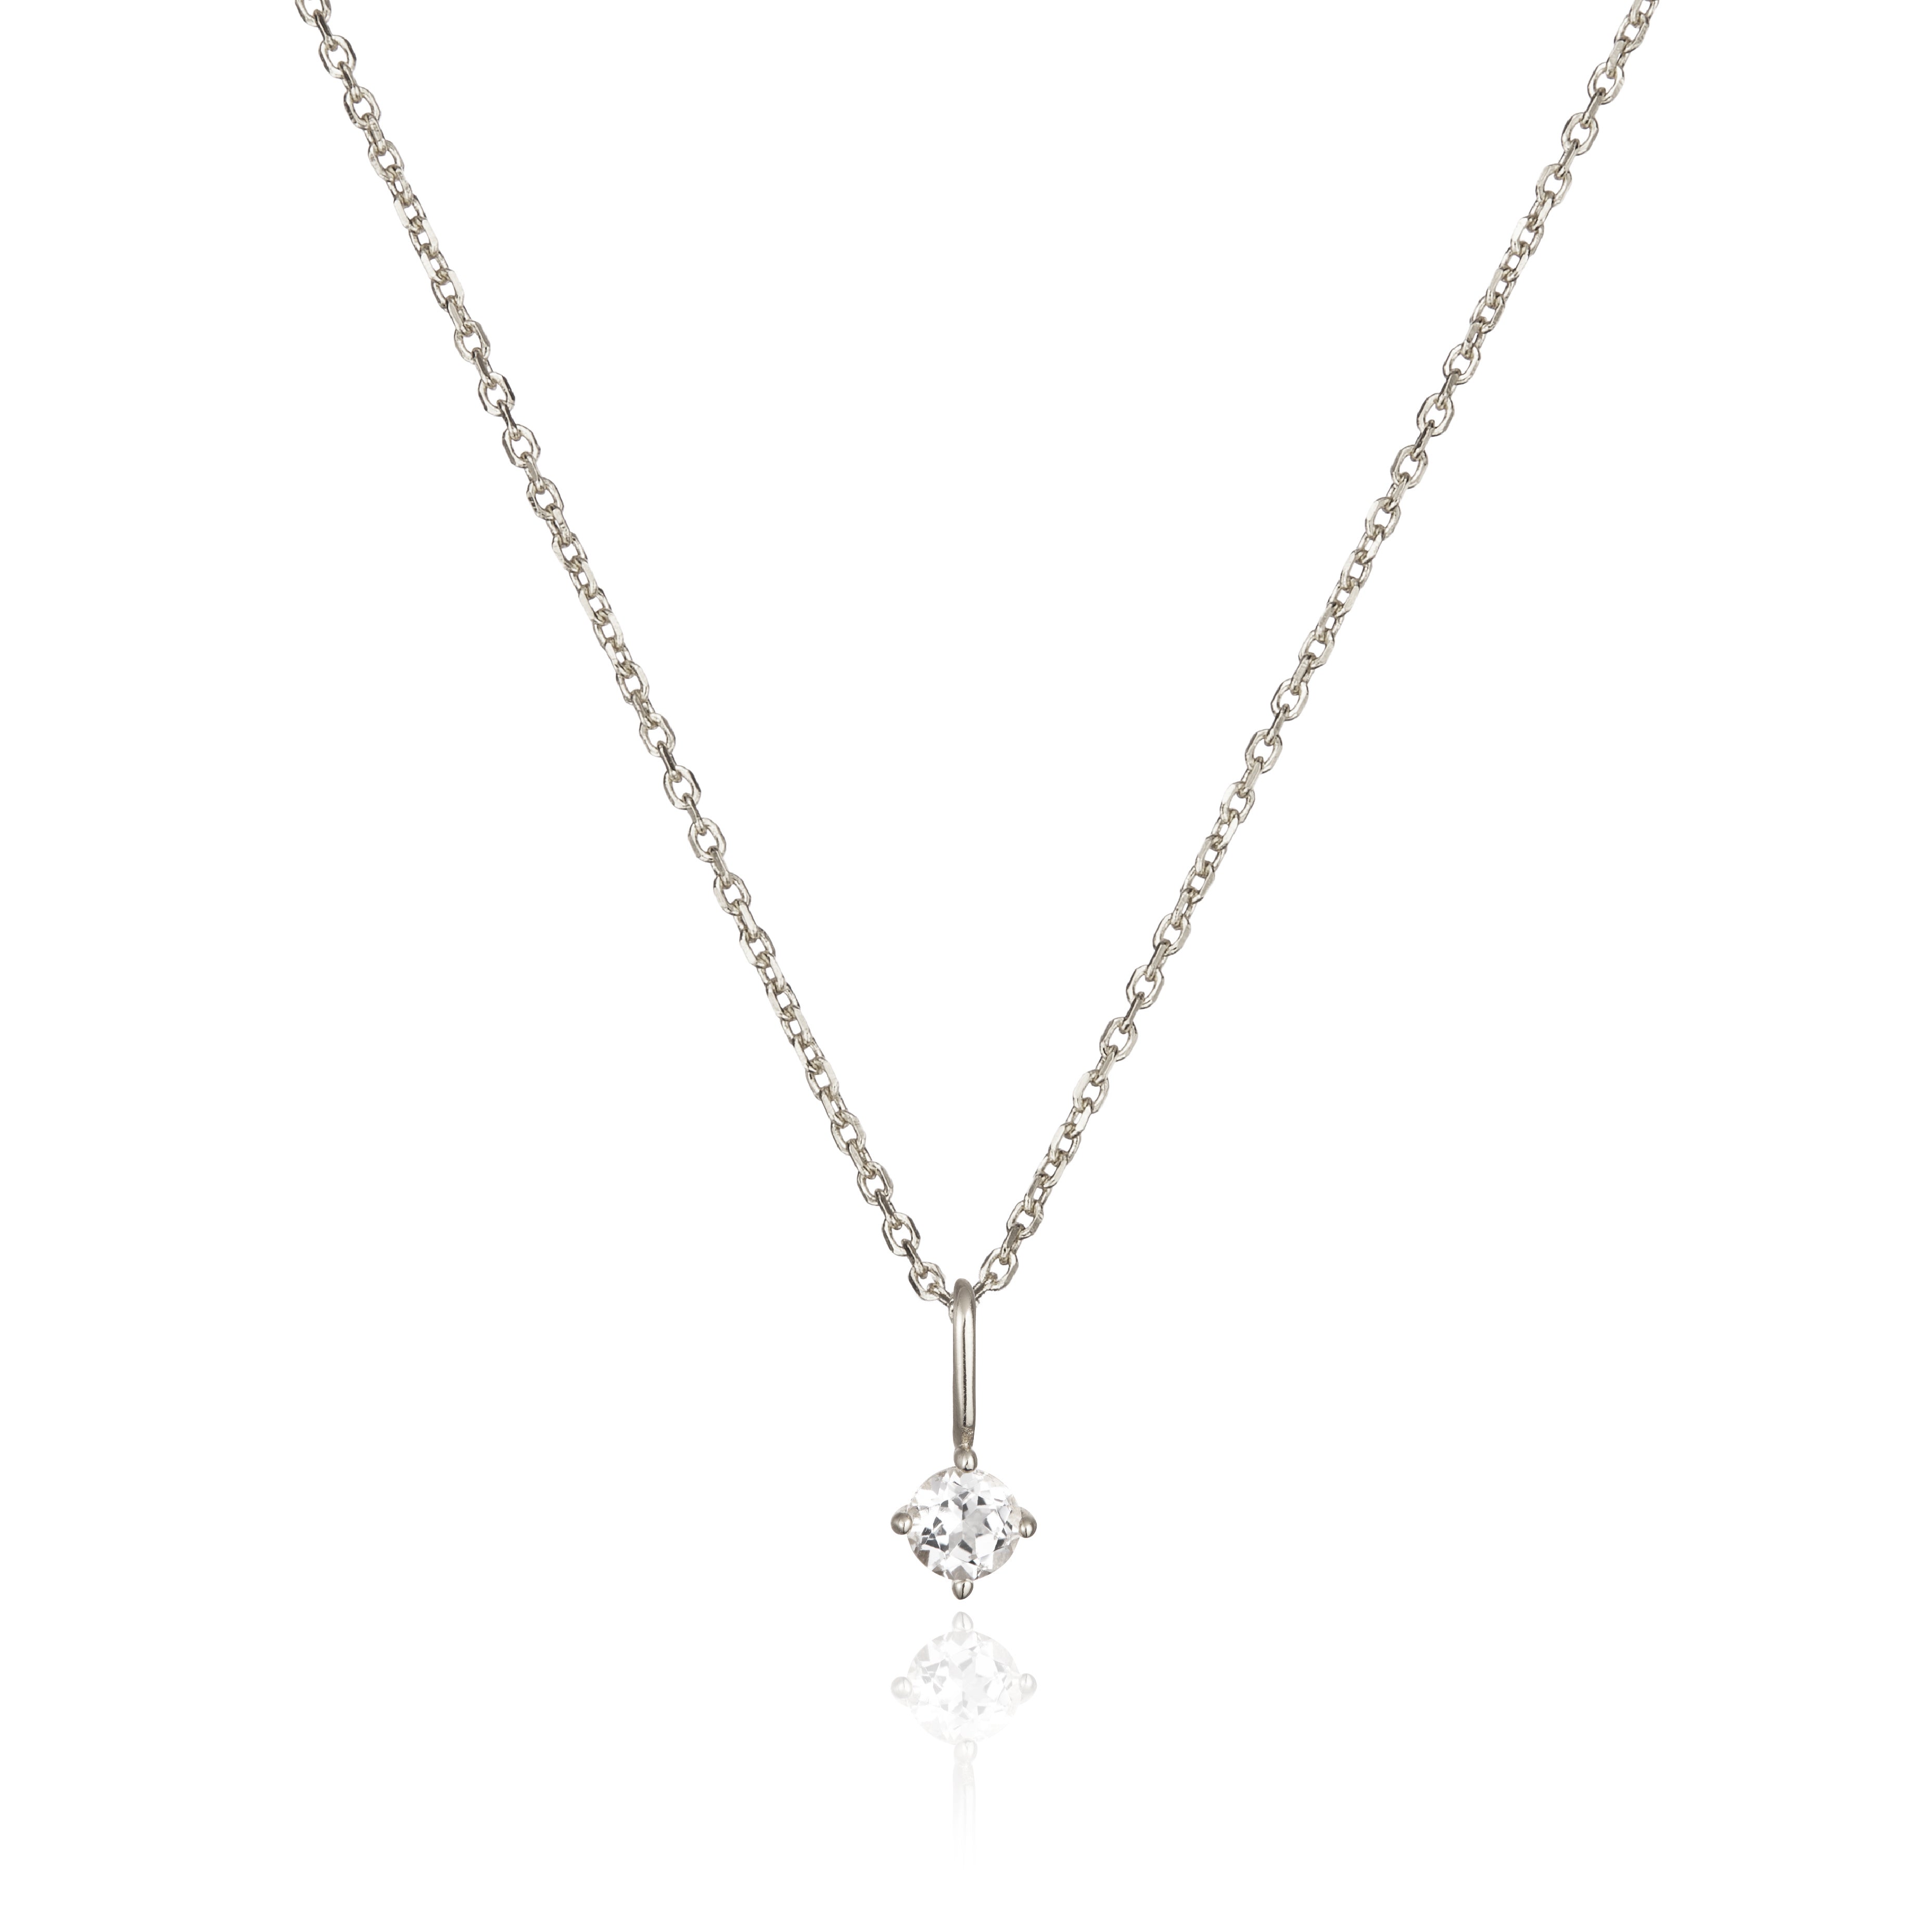 Solid White Gold Small Birthstone Pendant Necklace